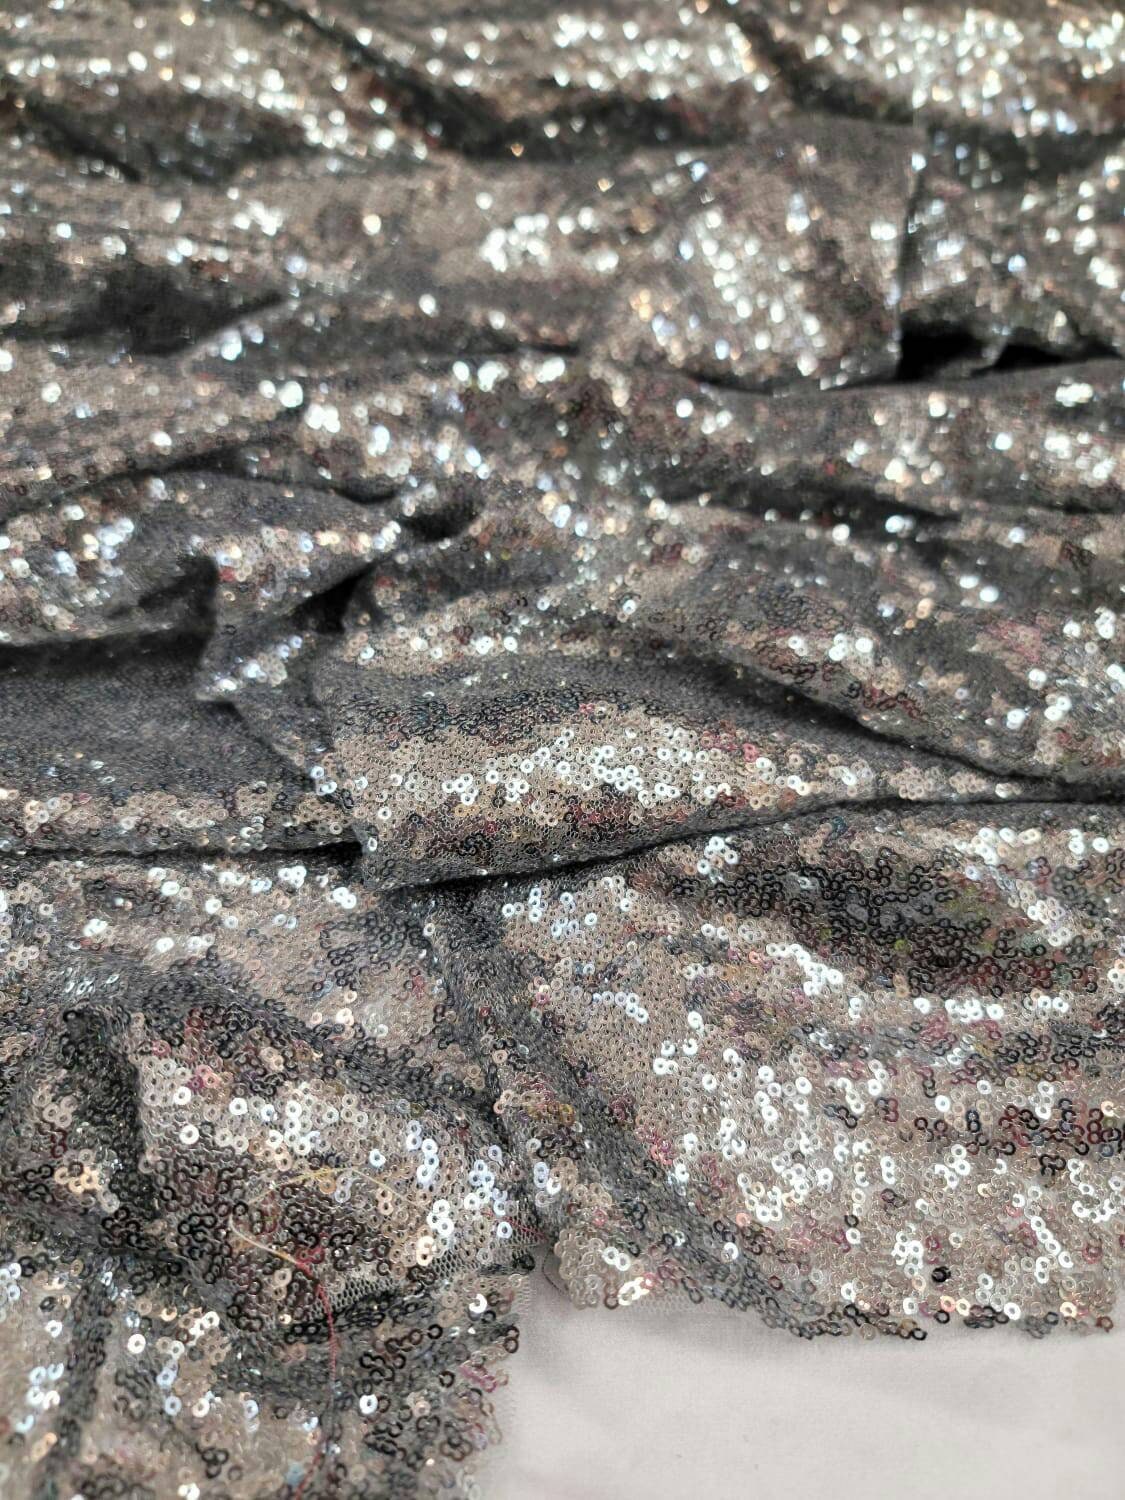 Silver Sequin Stretch Fabric Sold by the Yard Dancer Clothing Decoration Draping Clothing Fashion Prom Dress Bridal Gun Metal